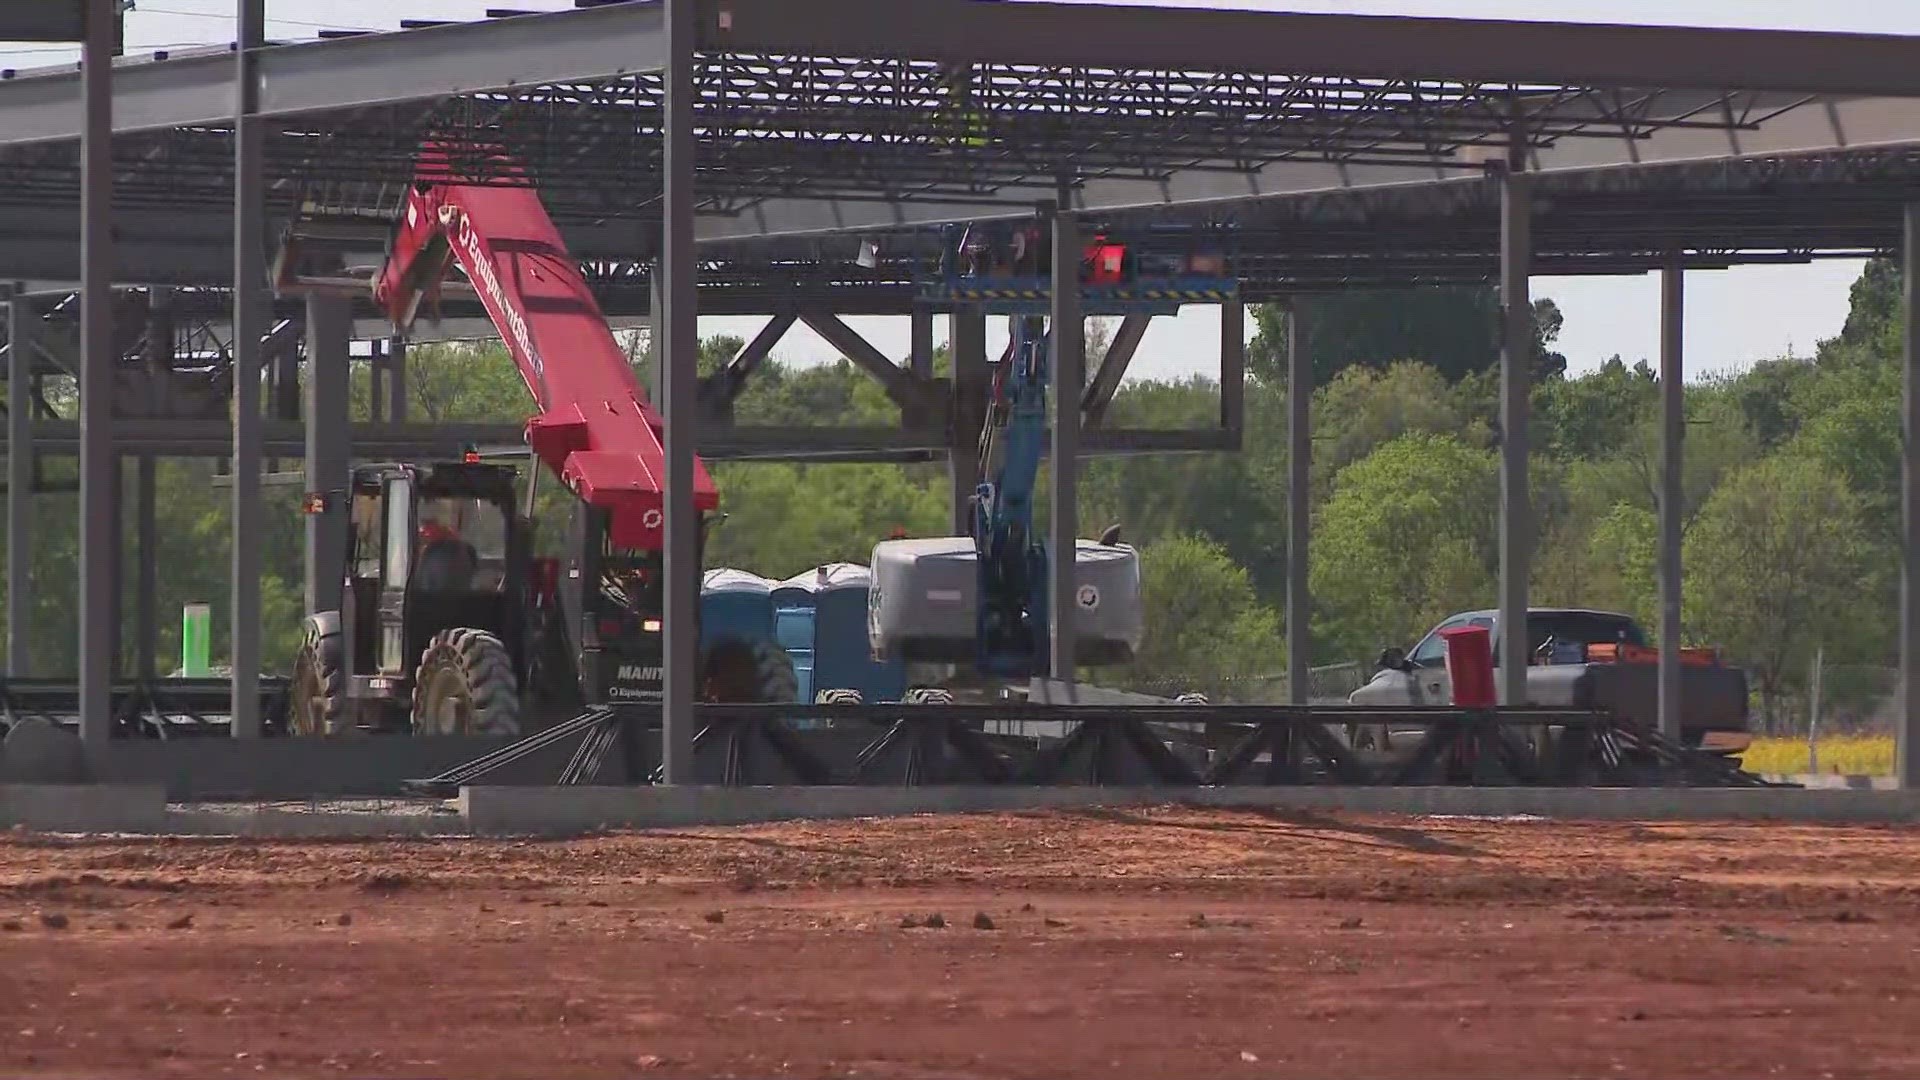 The 42,000-foot facility will train thousands of workers with skills and knowledge to work in Ford's Hardin County electric vehicle battery plant under construction.